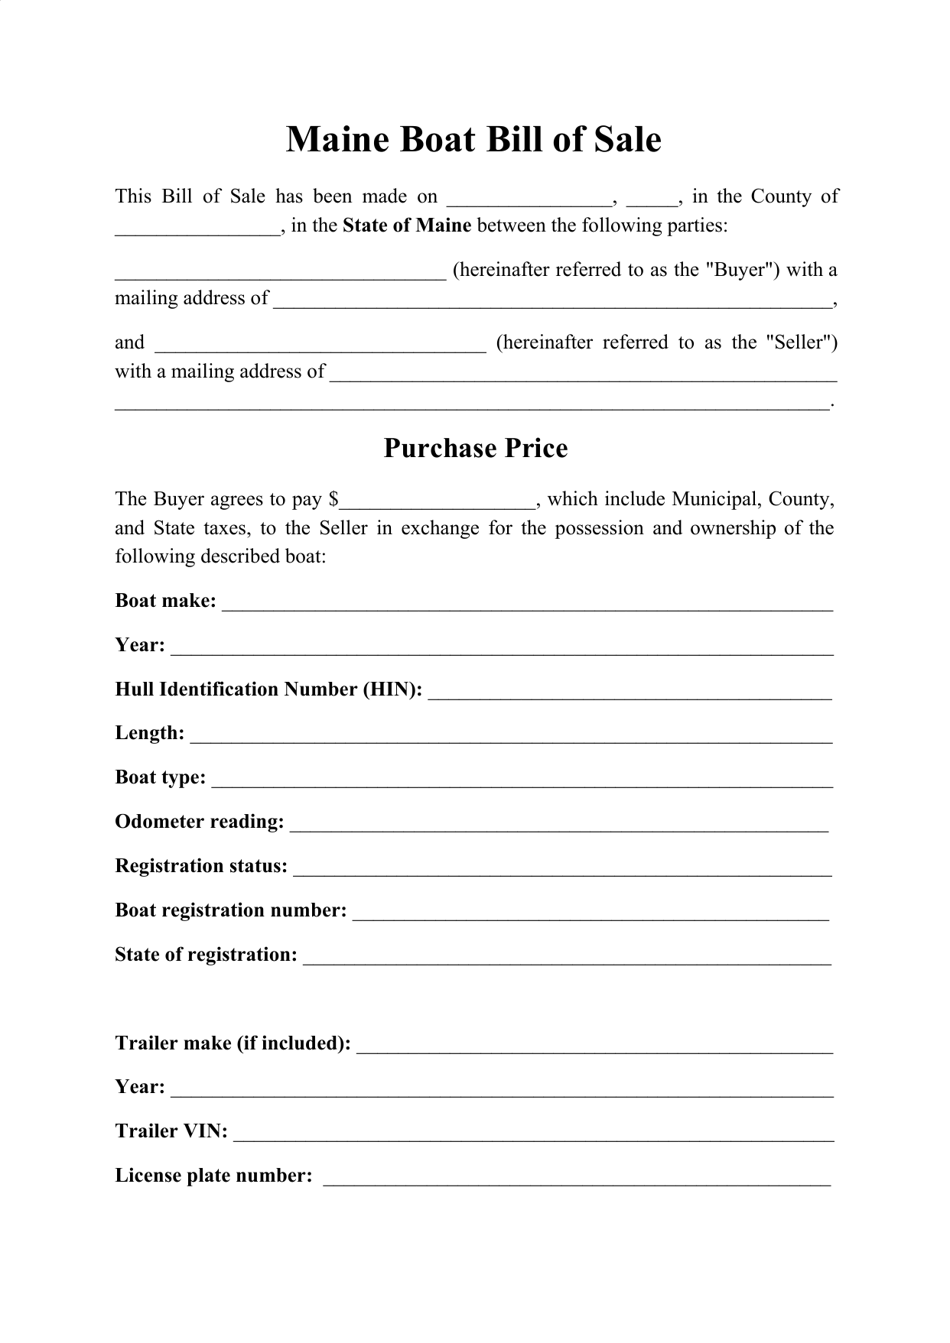 Maine Boat Bill of Sale Form Download Printable PDF Templateroller